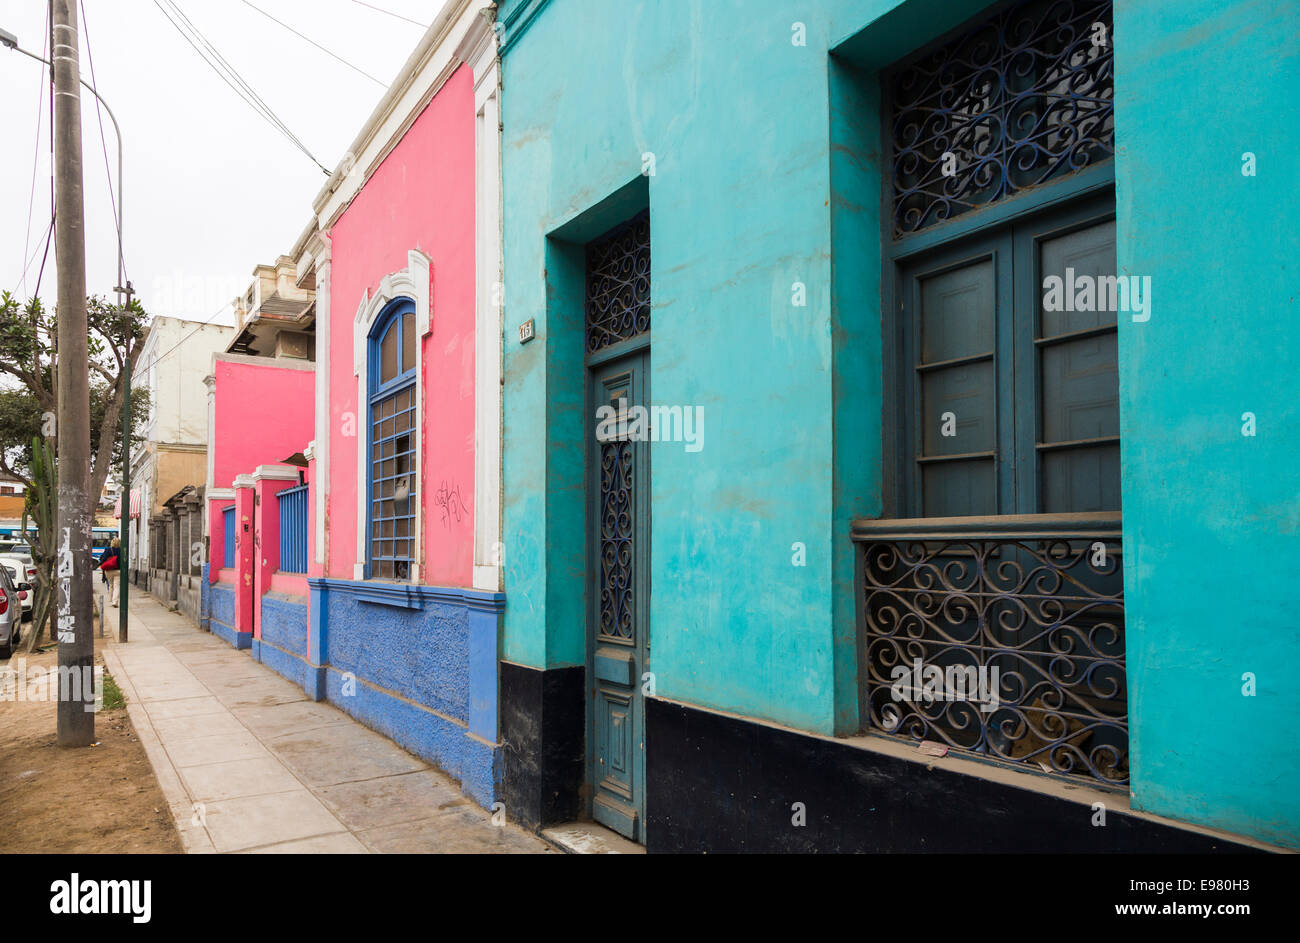 Colourful, brightly coloured local terraced houses and buildings in a street in Barranco, a suburb of Lima, Peru Stock Photo